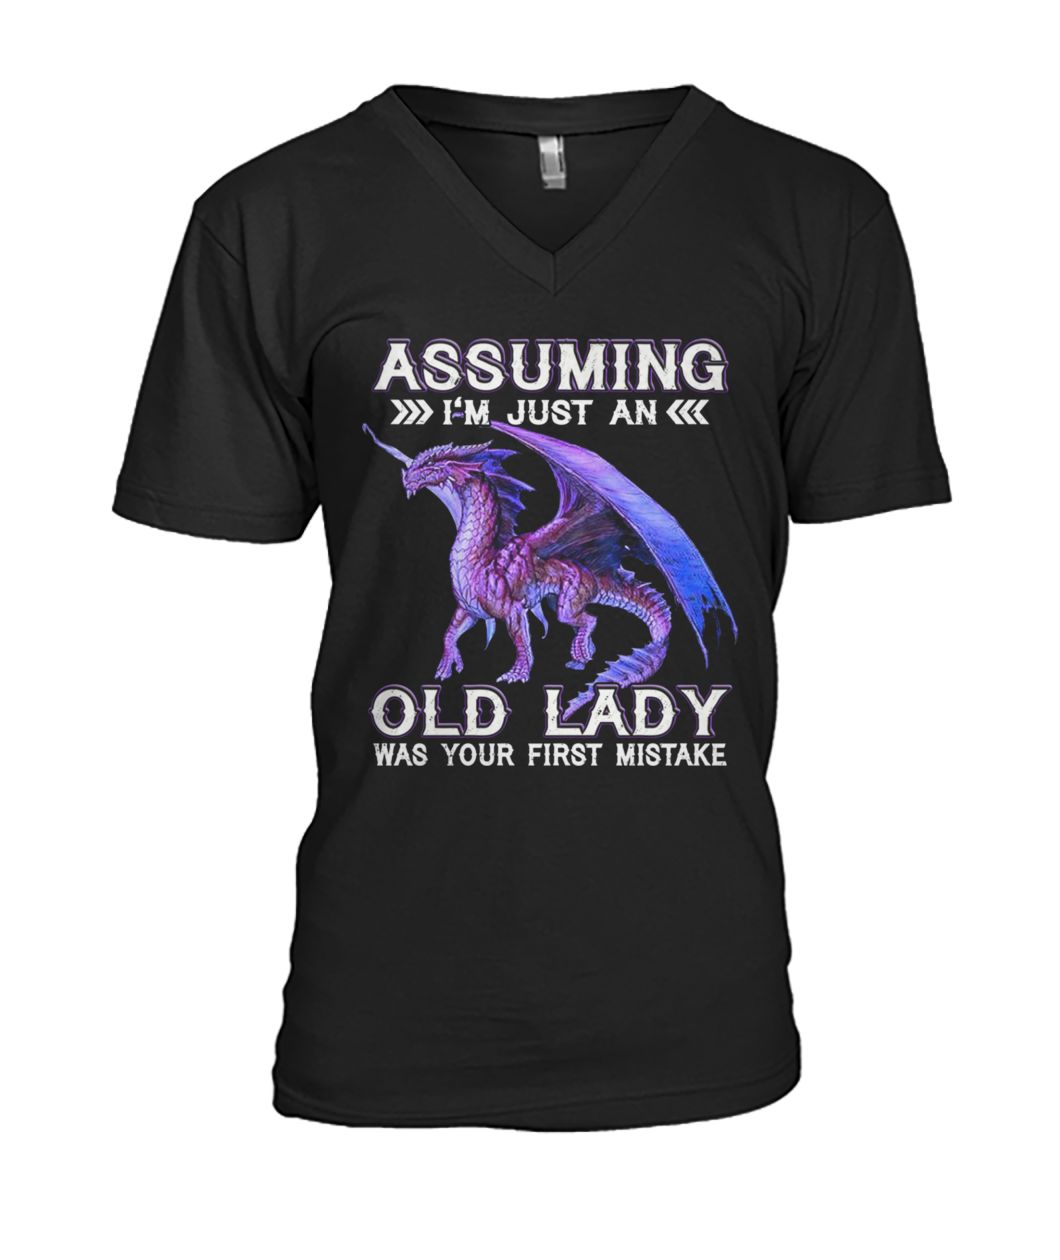 Purple dragon assuming I'm just an old lady was your first mistake mens v-neck